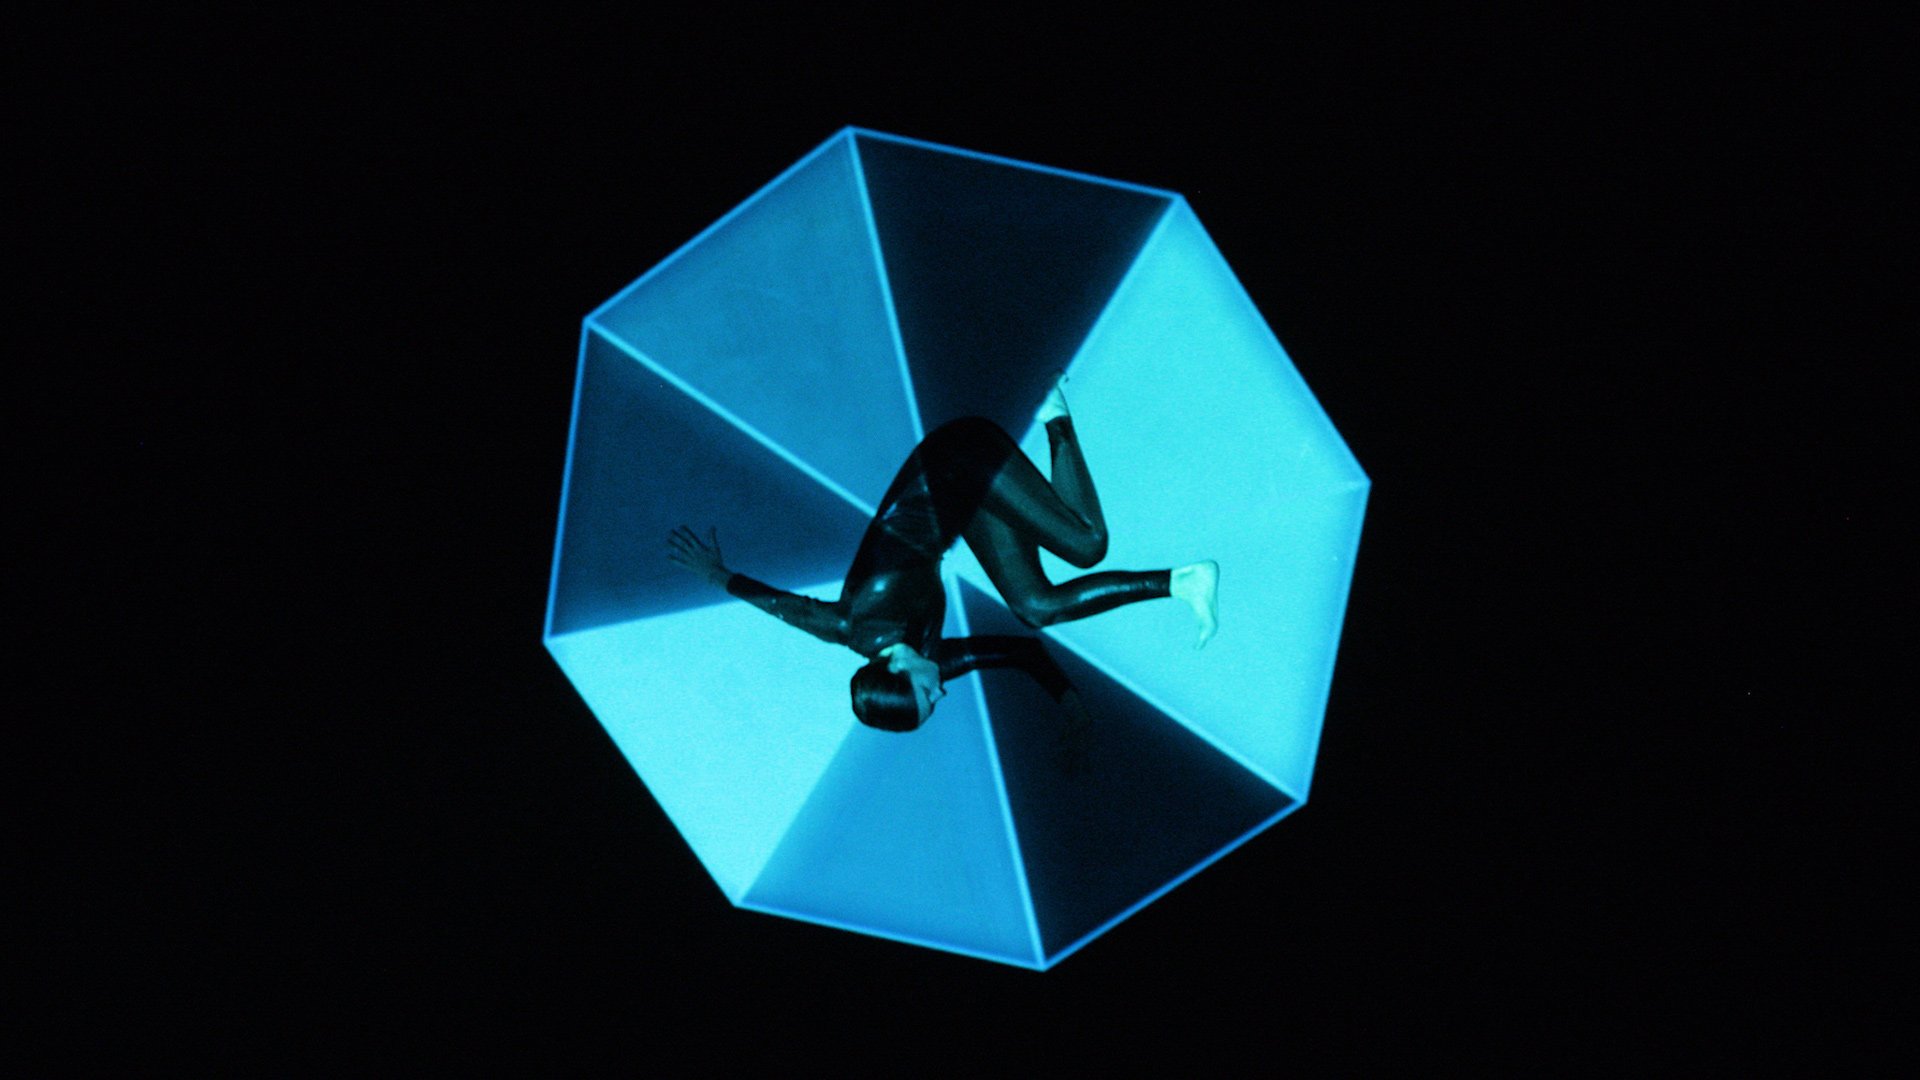 A projected image of a performer's prone body against an octagonal background of dark and pale blue shades that sides in a black void